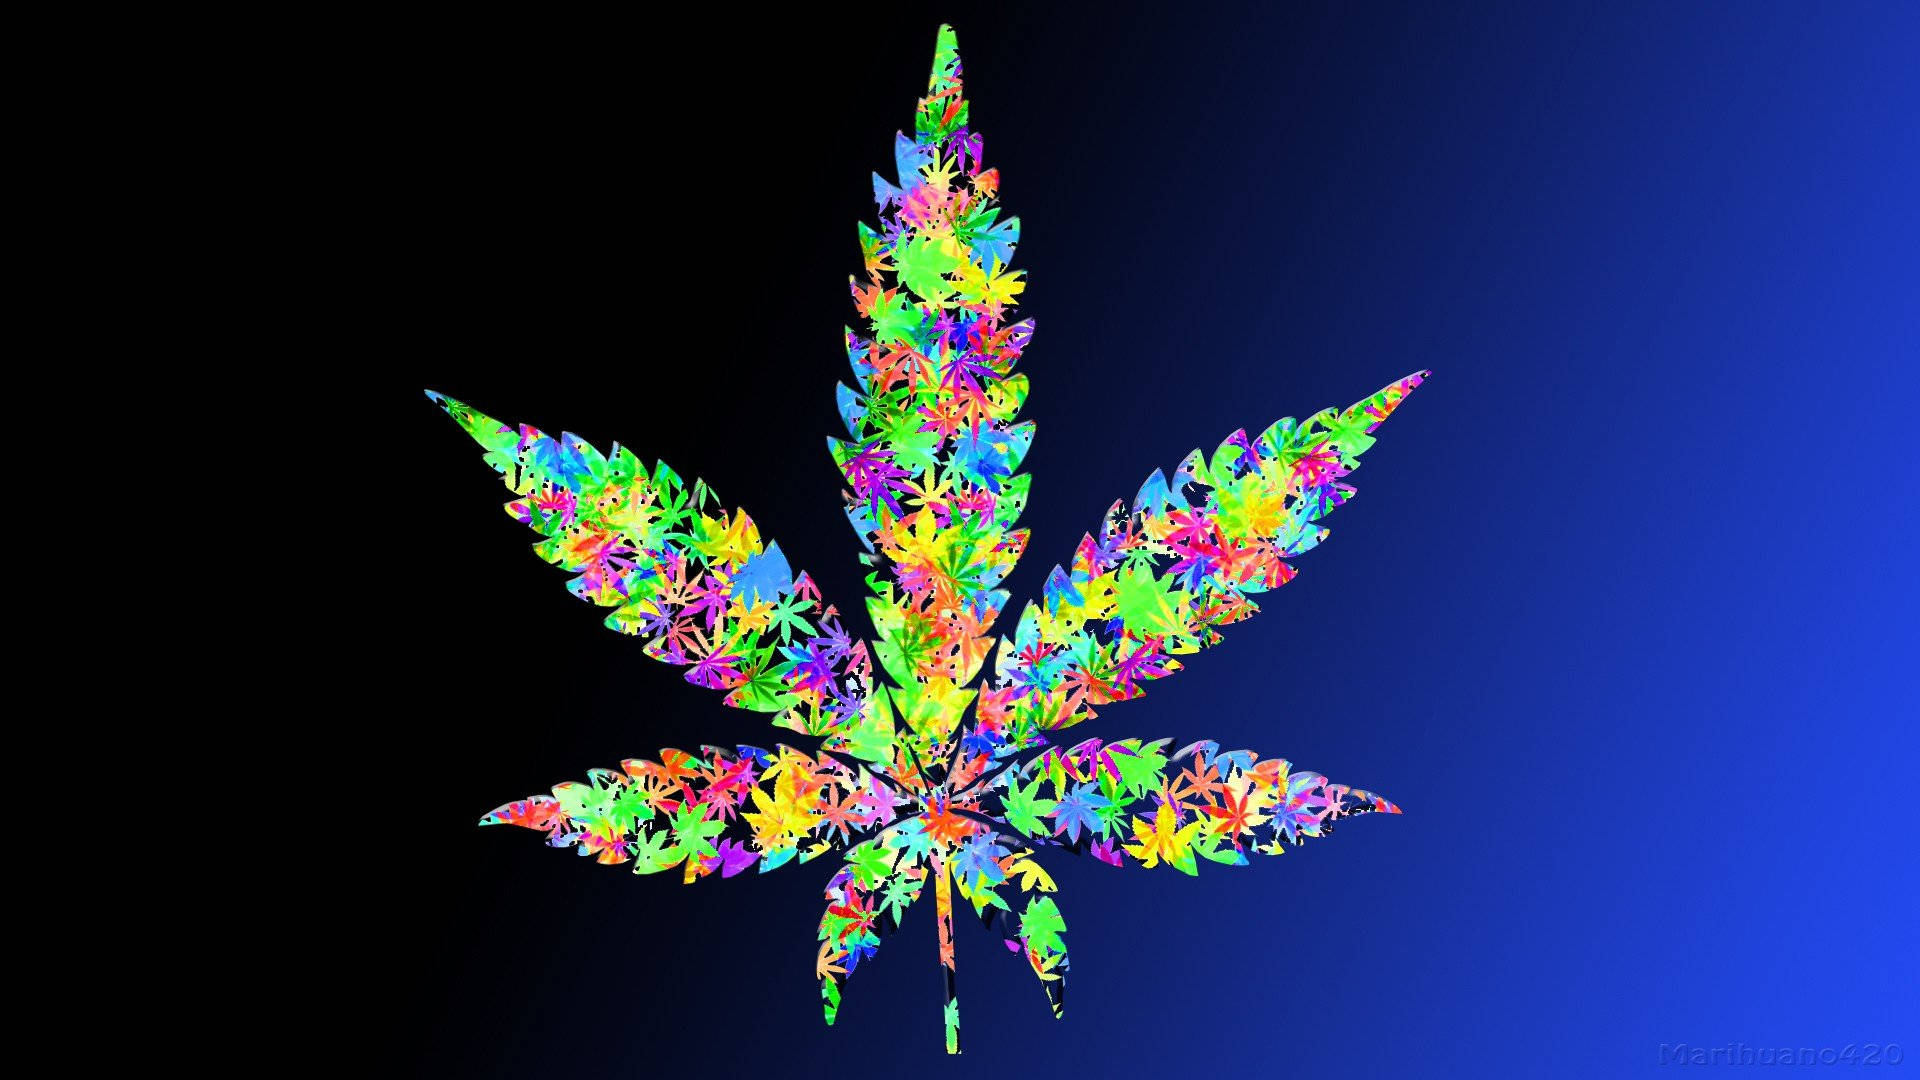 Cool Weed Wallpaper & Background For FREE